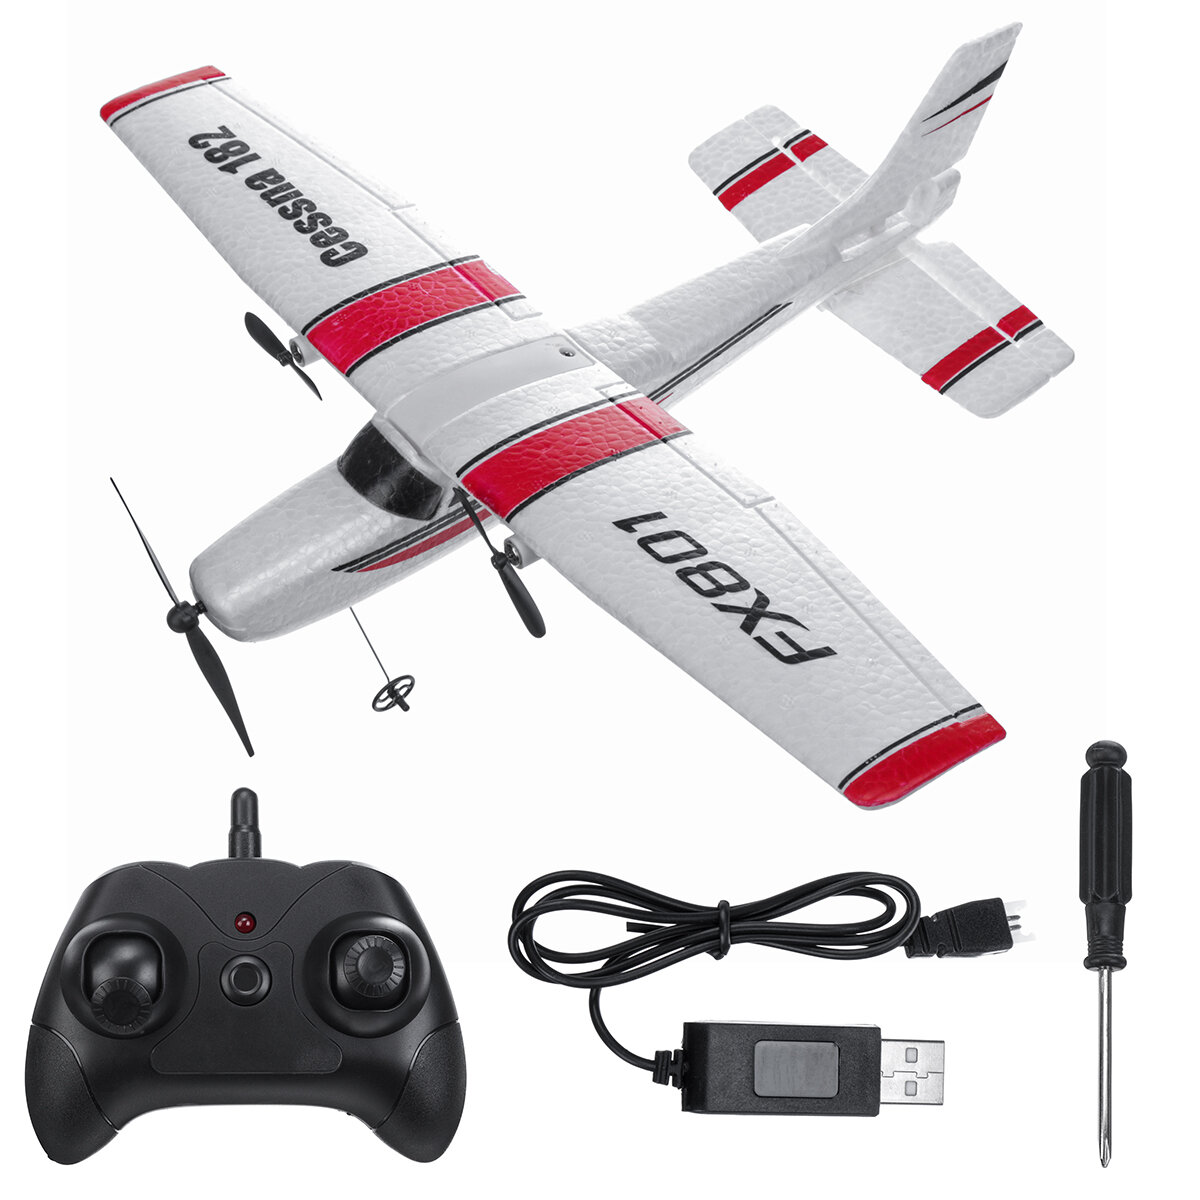 FX801 2.4GHz 2CH 530mm Wingspan 6-Axis Gyroscope EPP Glider RC Airplane RTF for Beginners